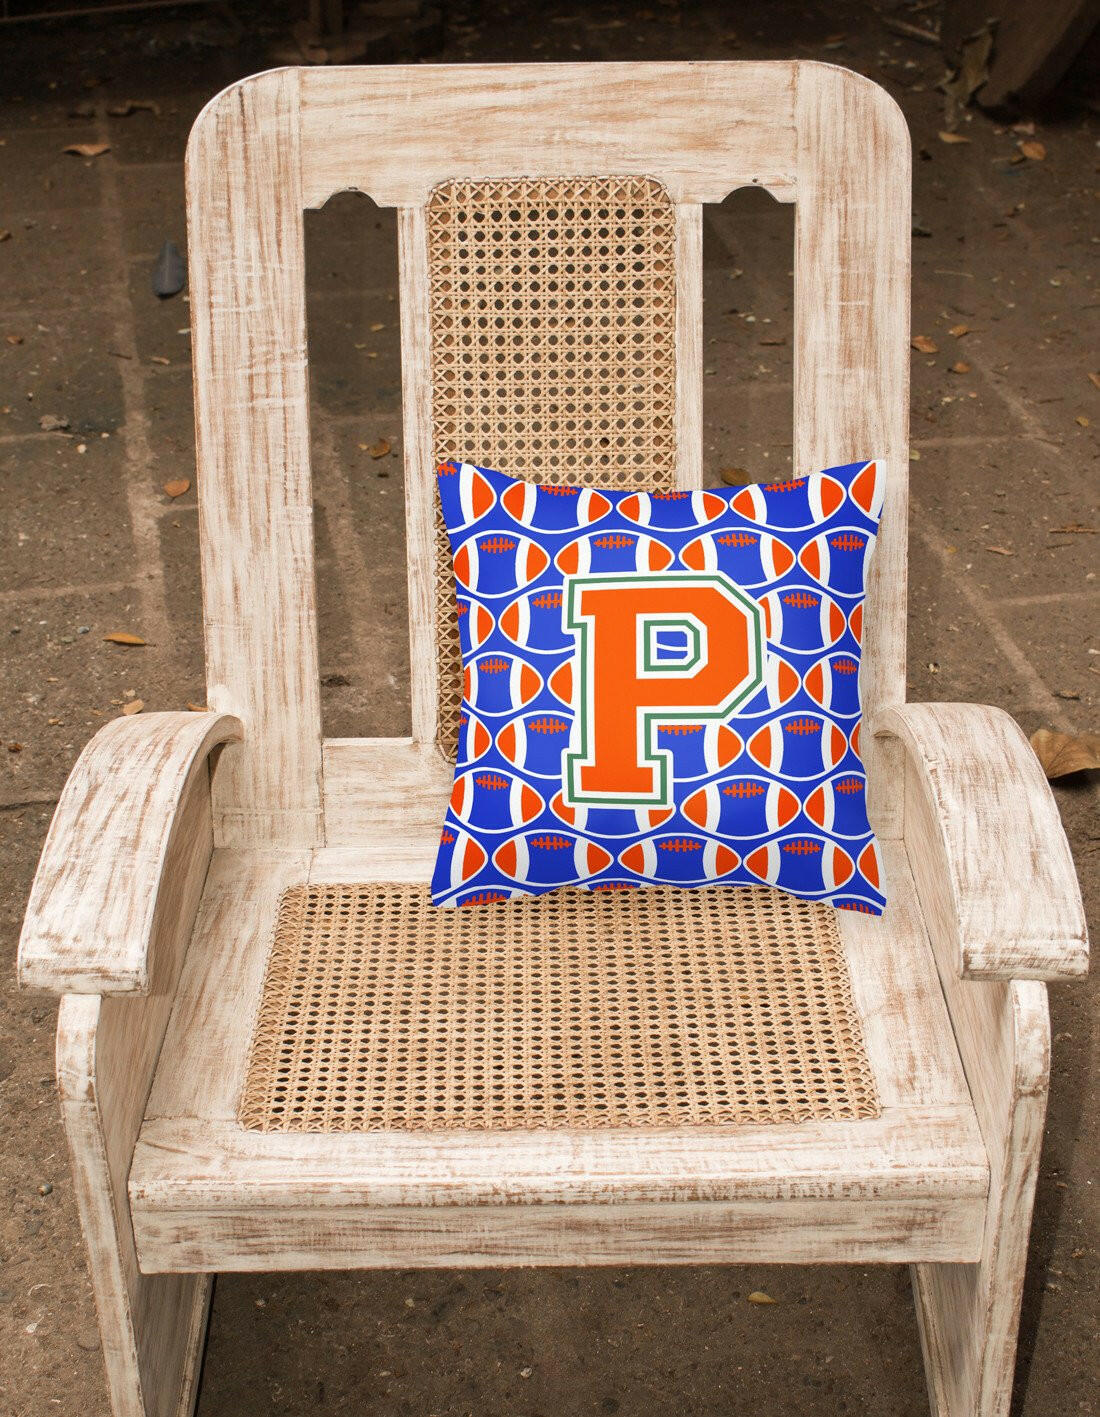 Letter P Football Green, Blue and Orange Fabric Decorative Pillow CJ1083-PPW1414 by Caroline's Treasures